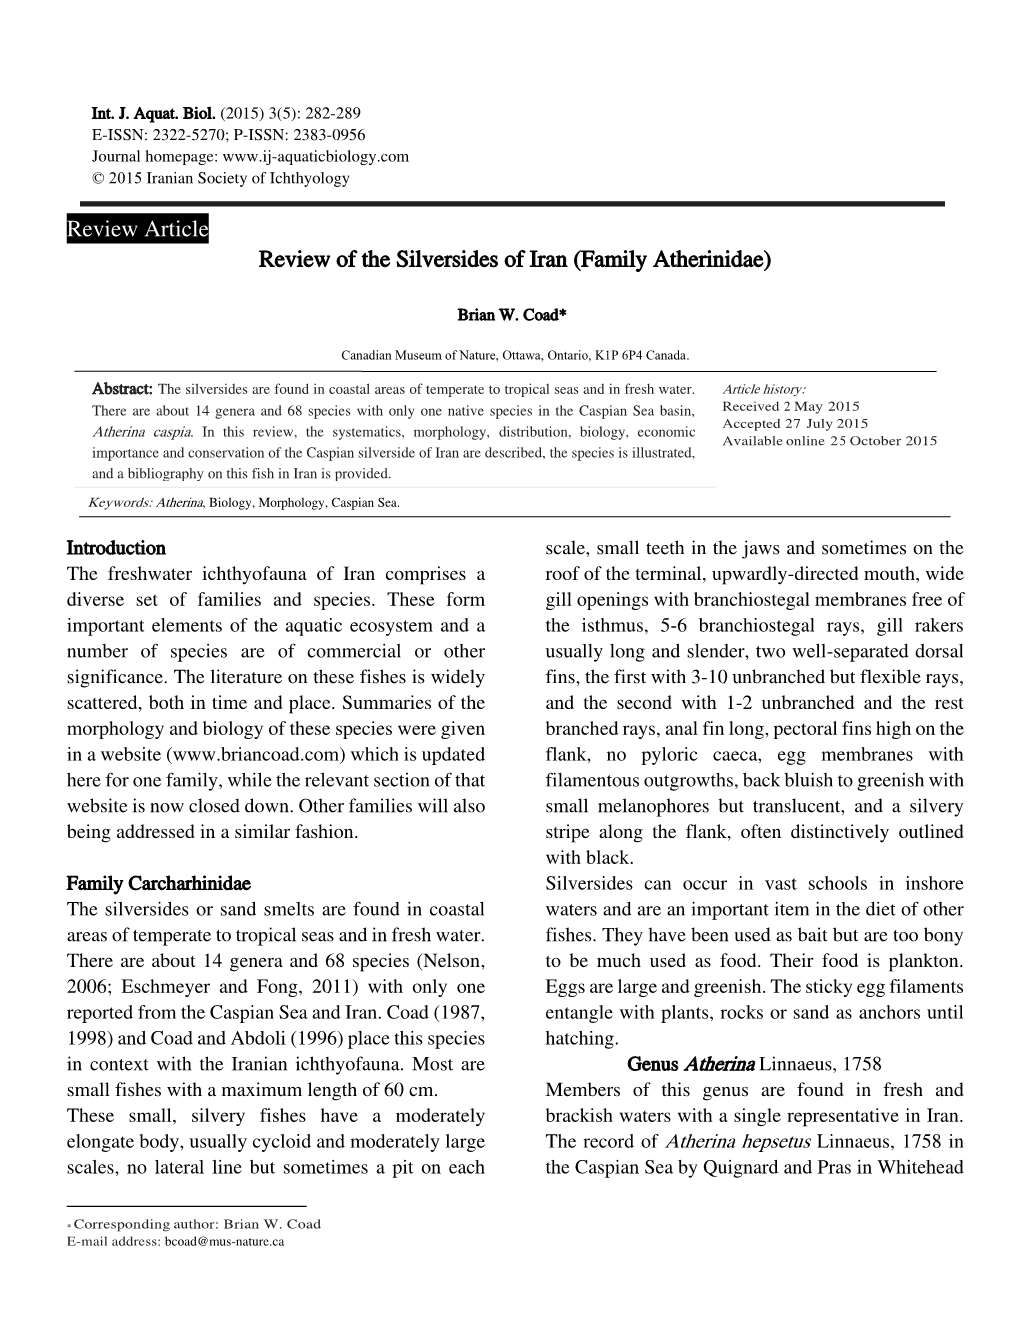 Review Article Review of the Silversides of Iran (Family Atherinidae)